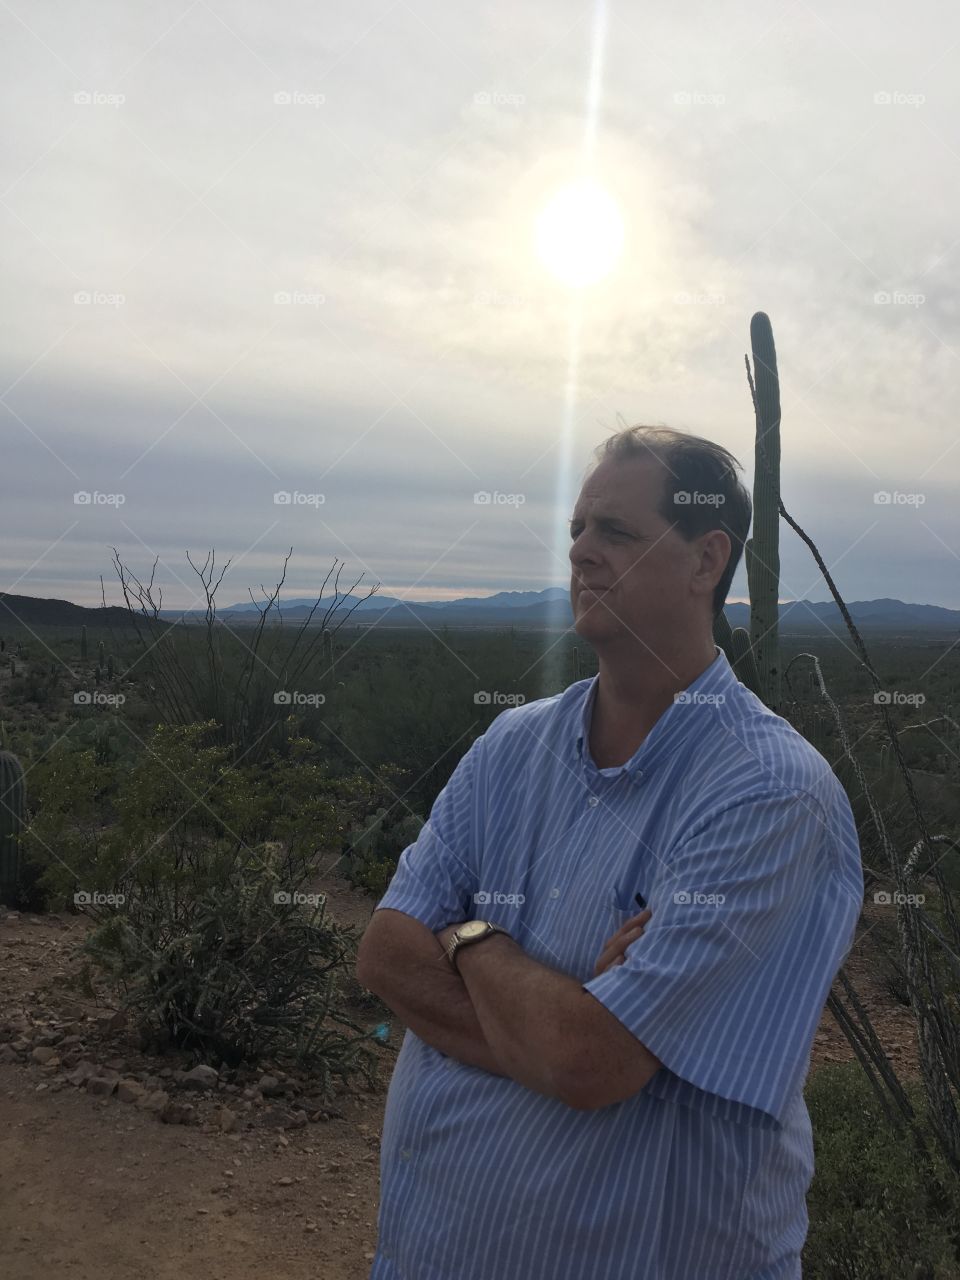 My Father looking at the endless cacti in Saguaro National Park 